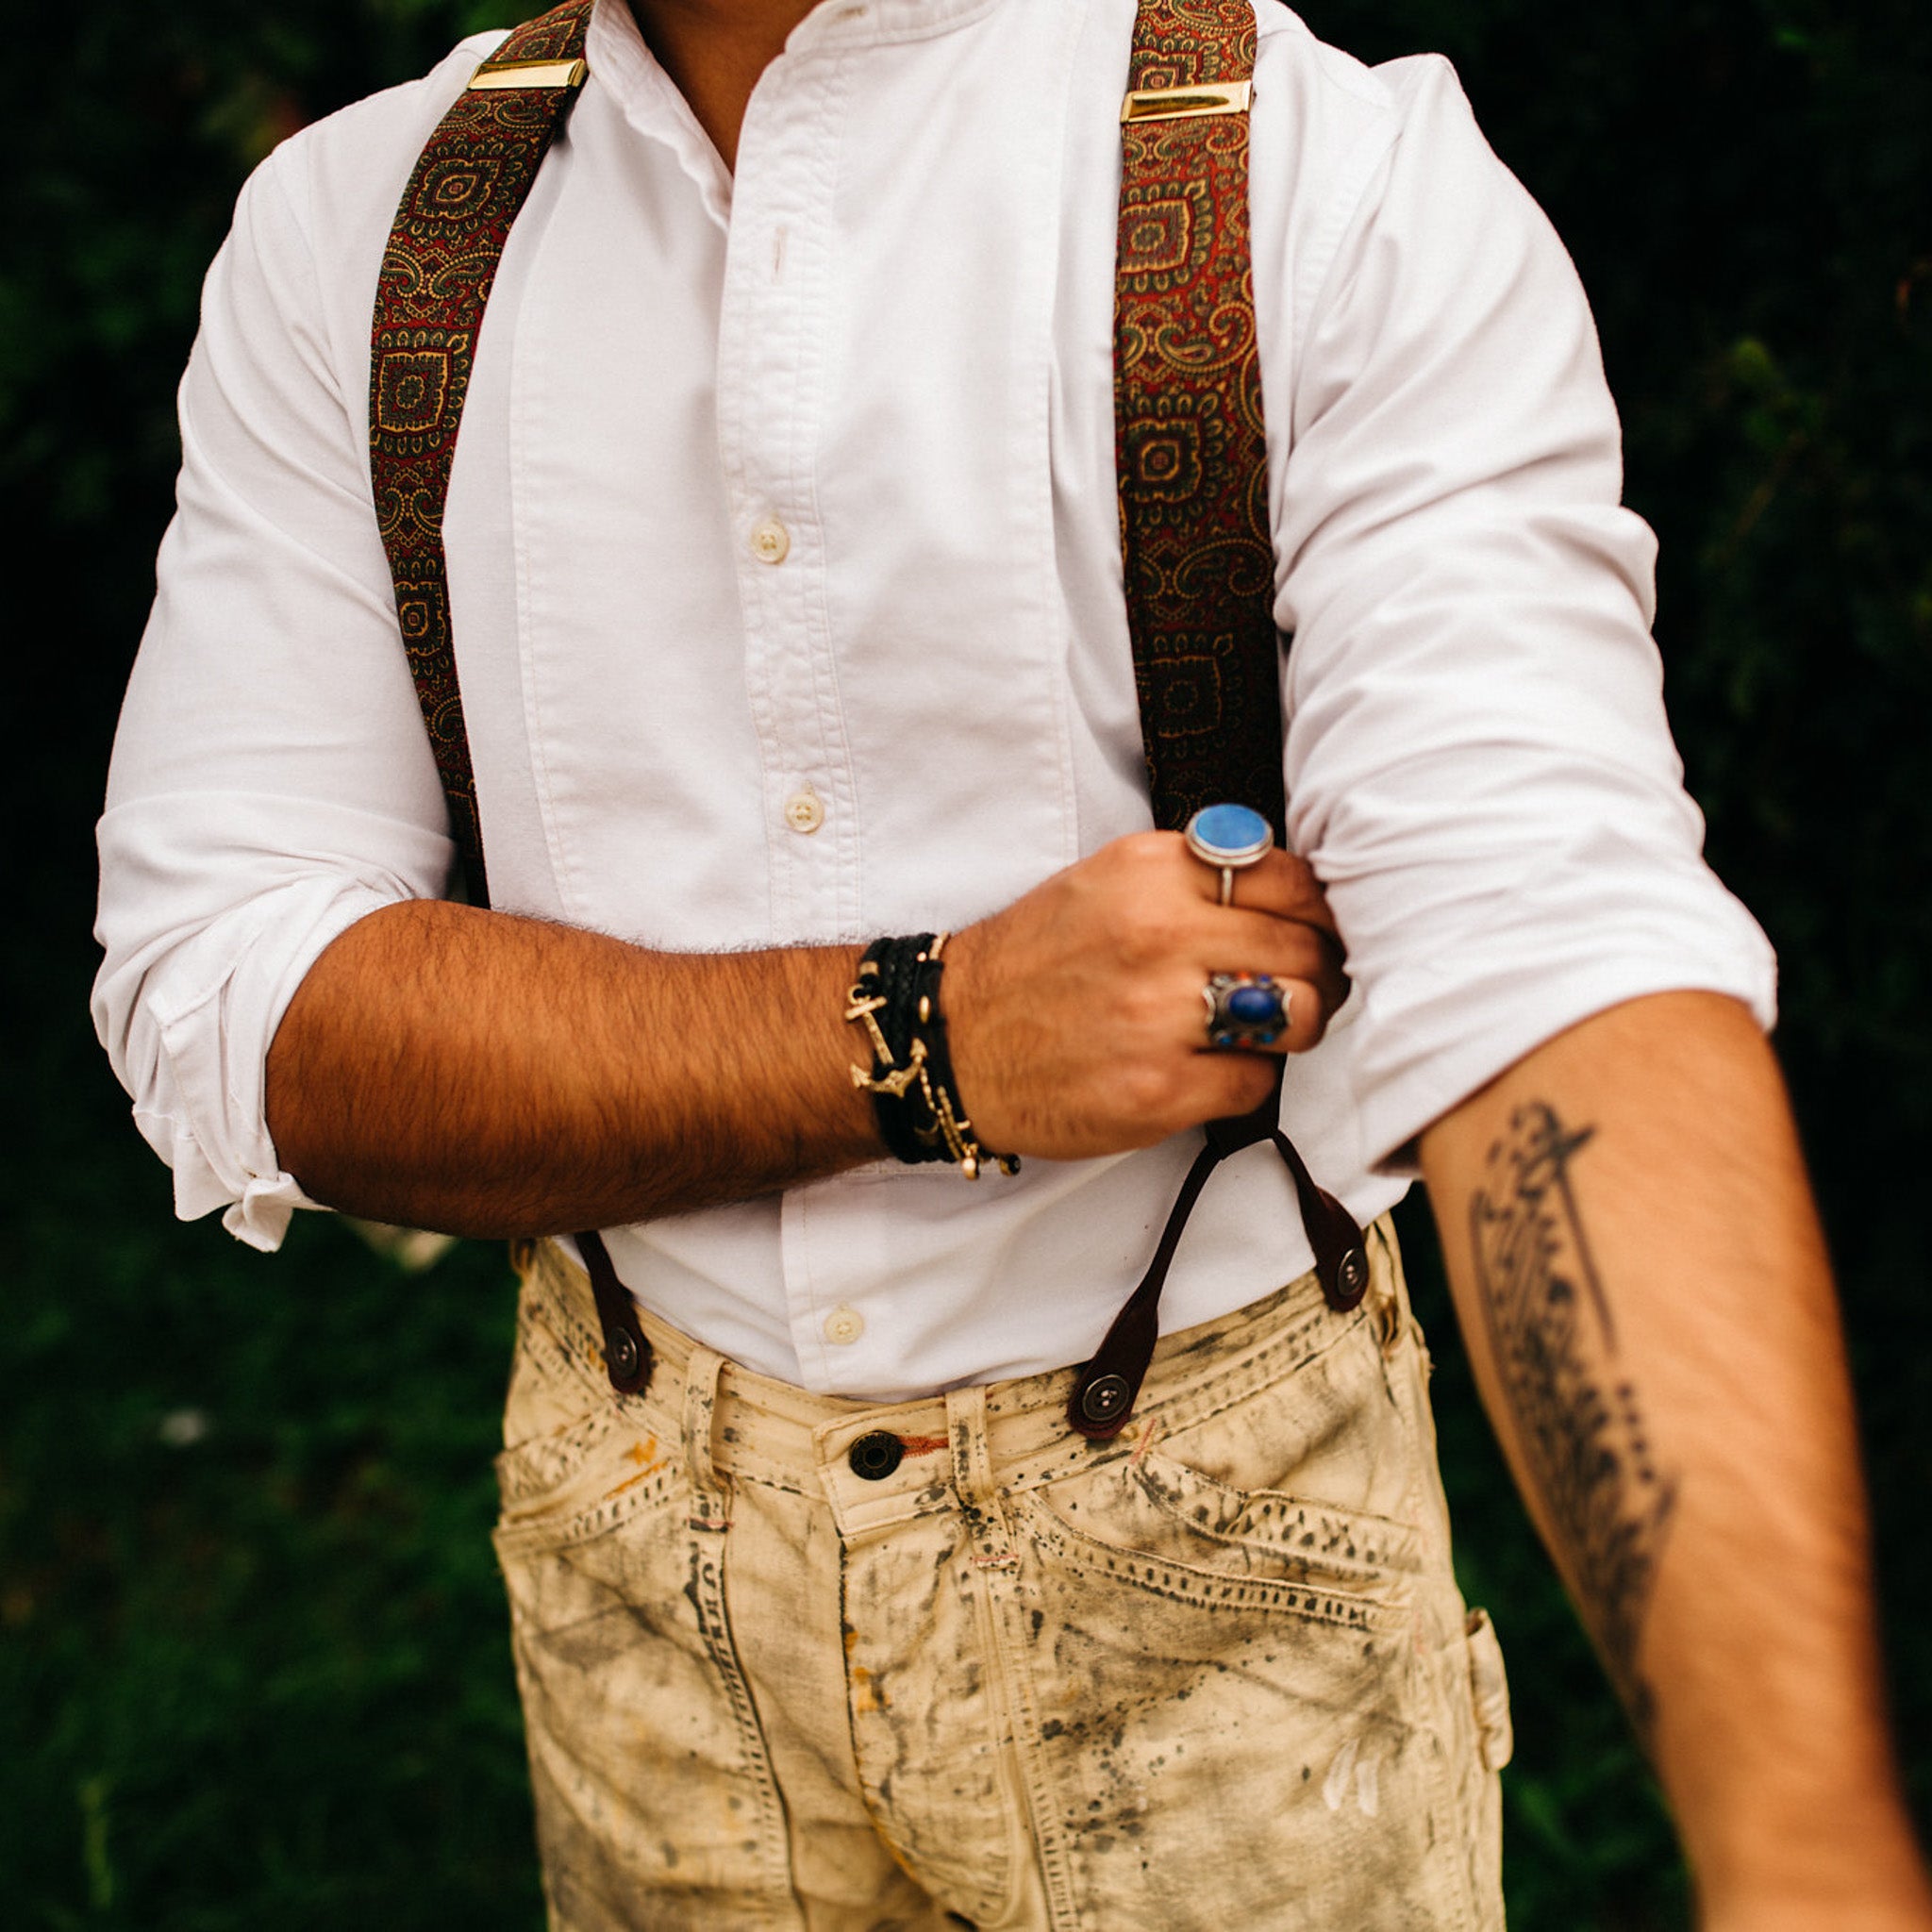 How to wear Suspenders - Man's guide to Braces